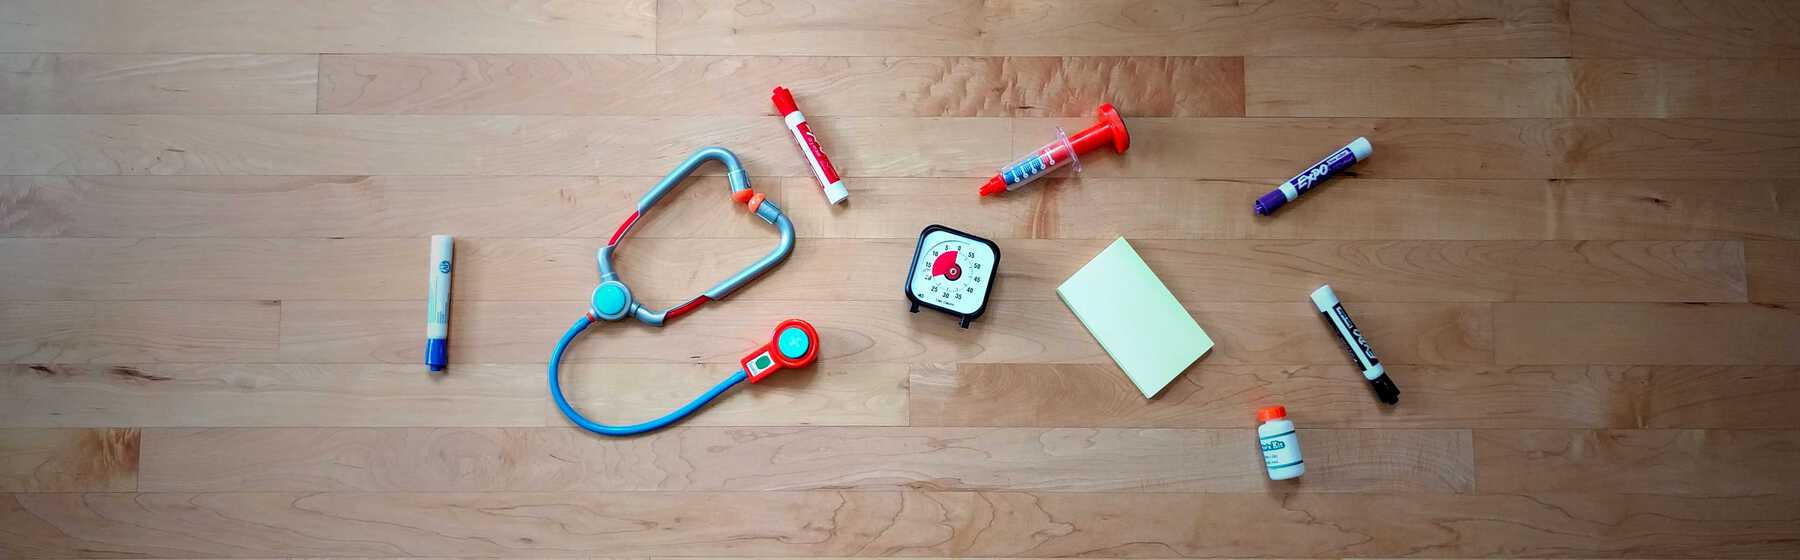 Whiteboard markers, post-it notes, a timer, and toy doctors tools arranged on a wood floor